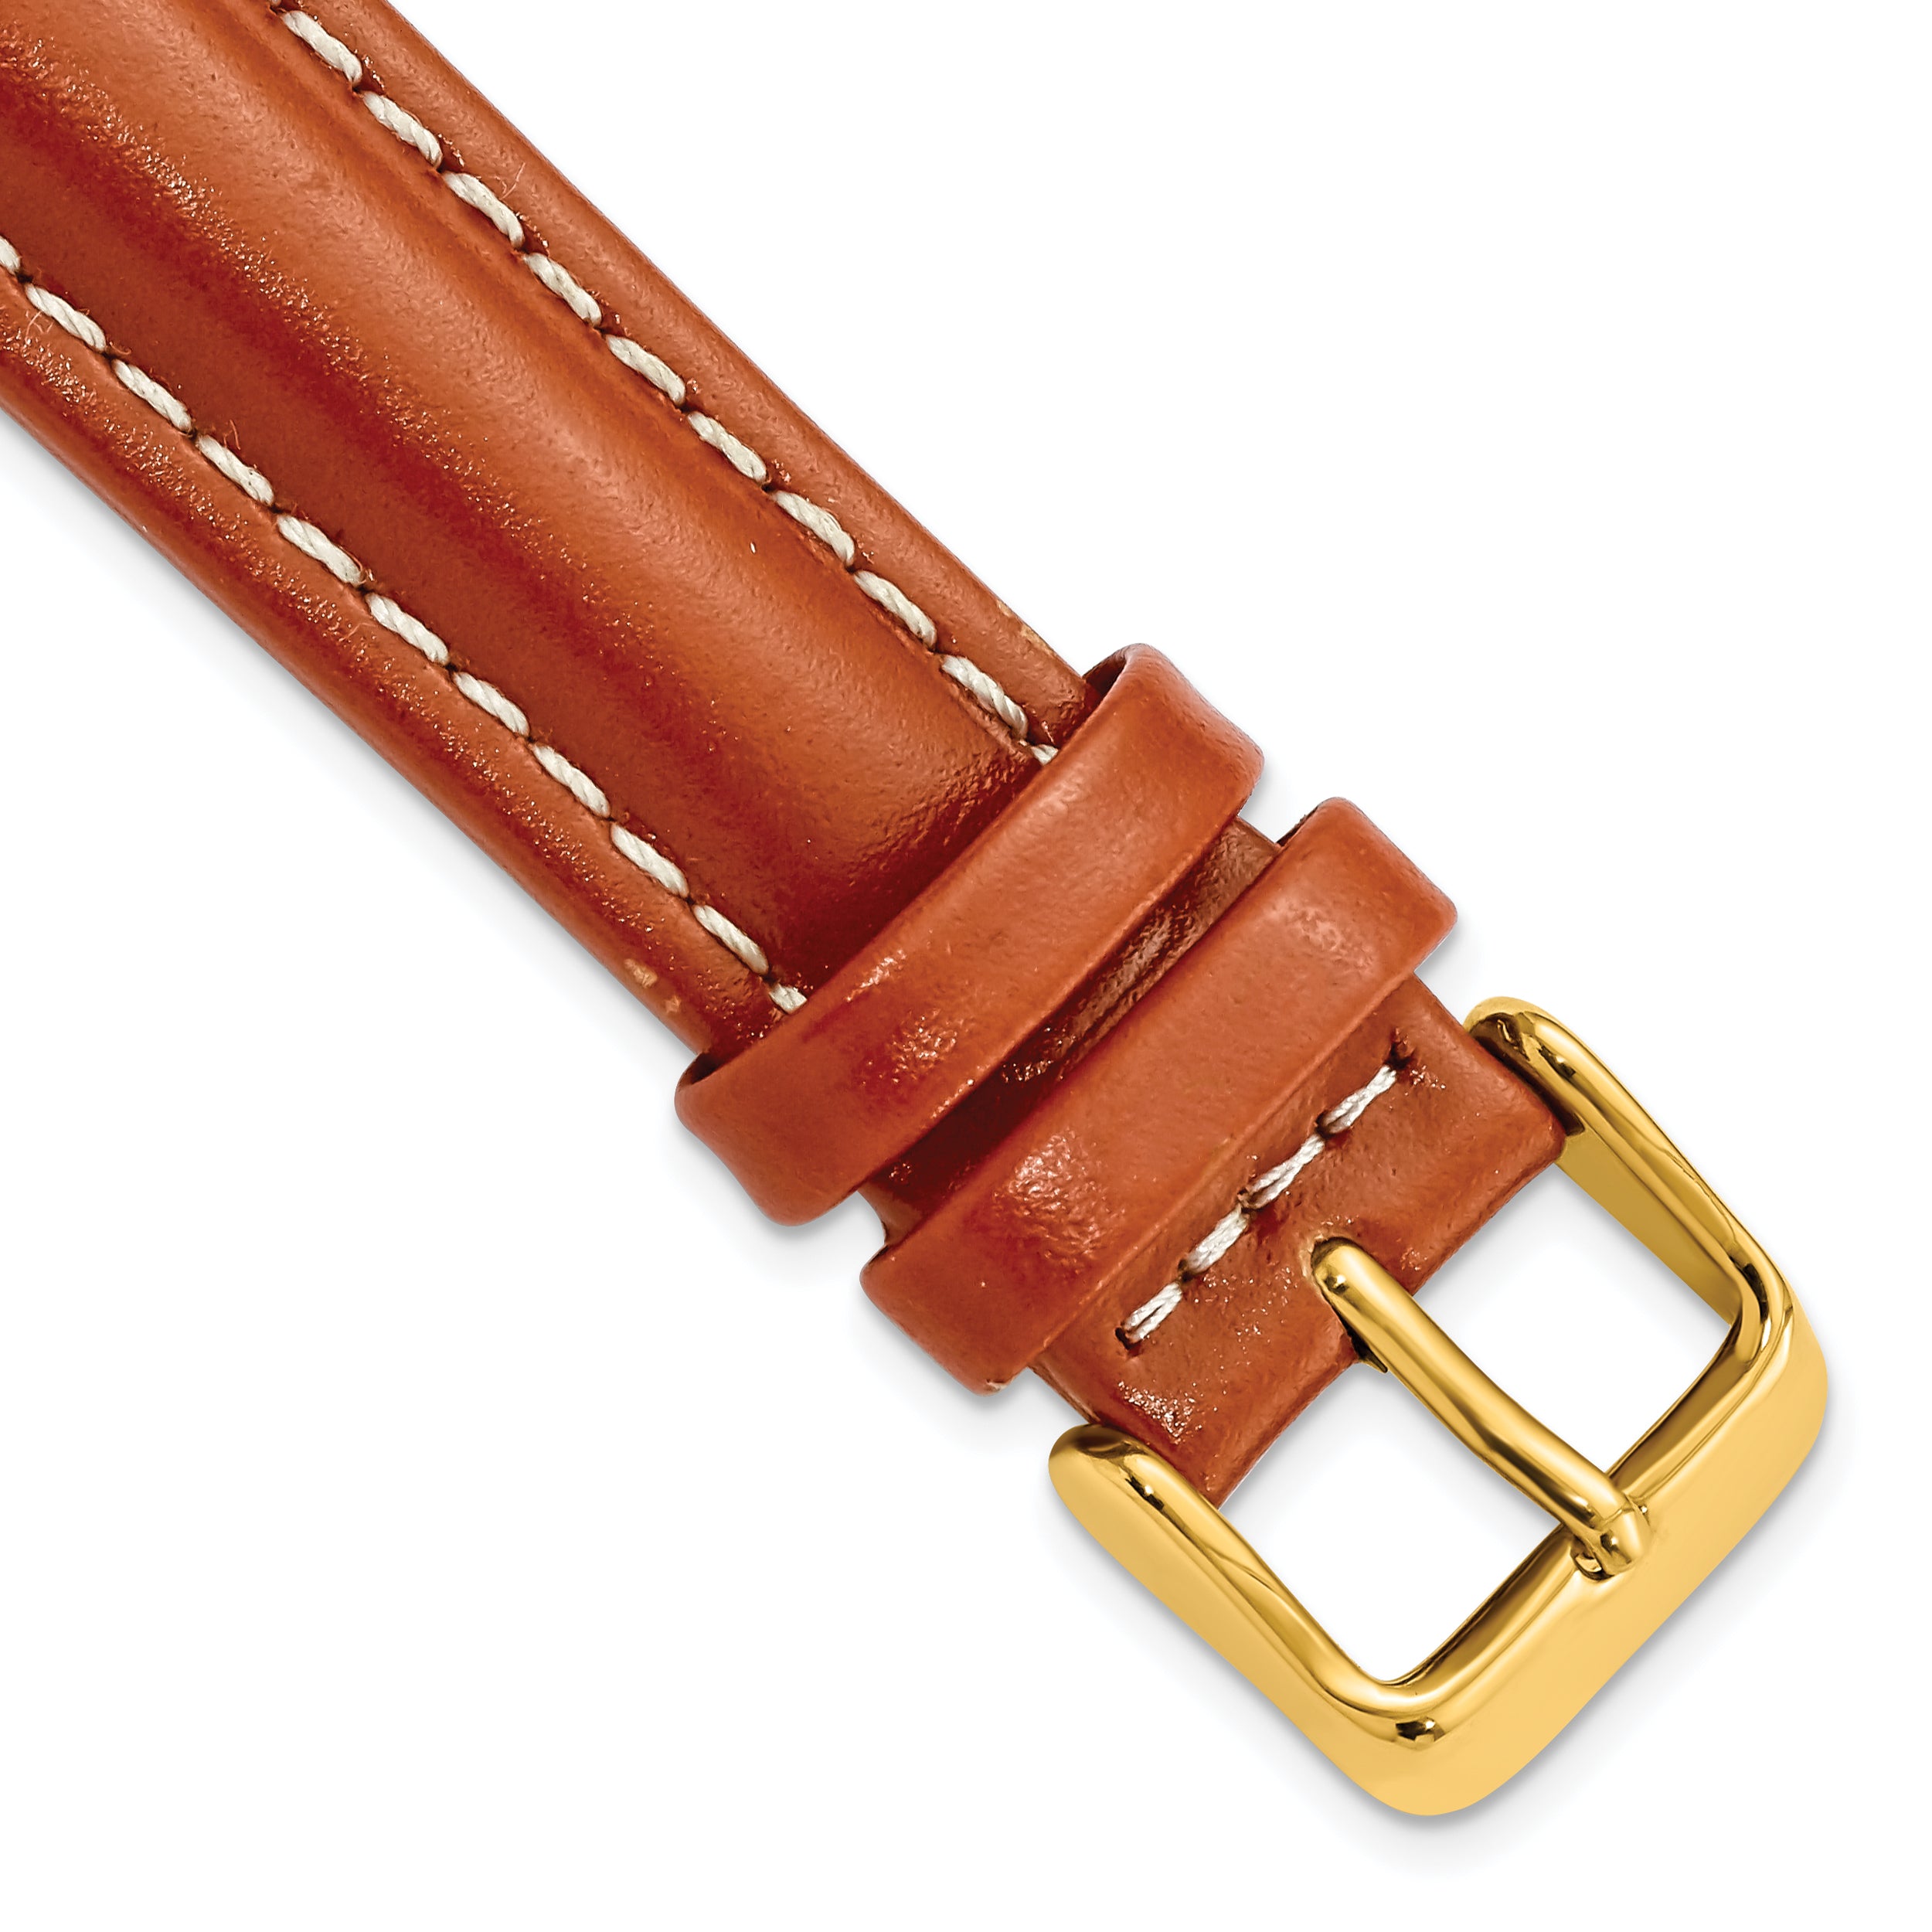 DeBeer 18mm Saddle Brown Oil-tanned Leather with White Stitching and Gold-tone Buckle 7.5 inch Watch Band